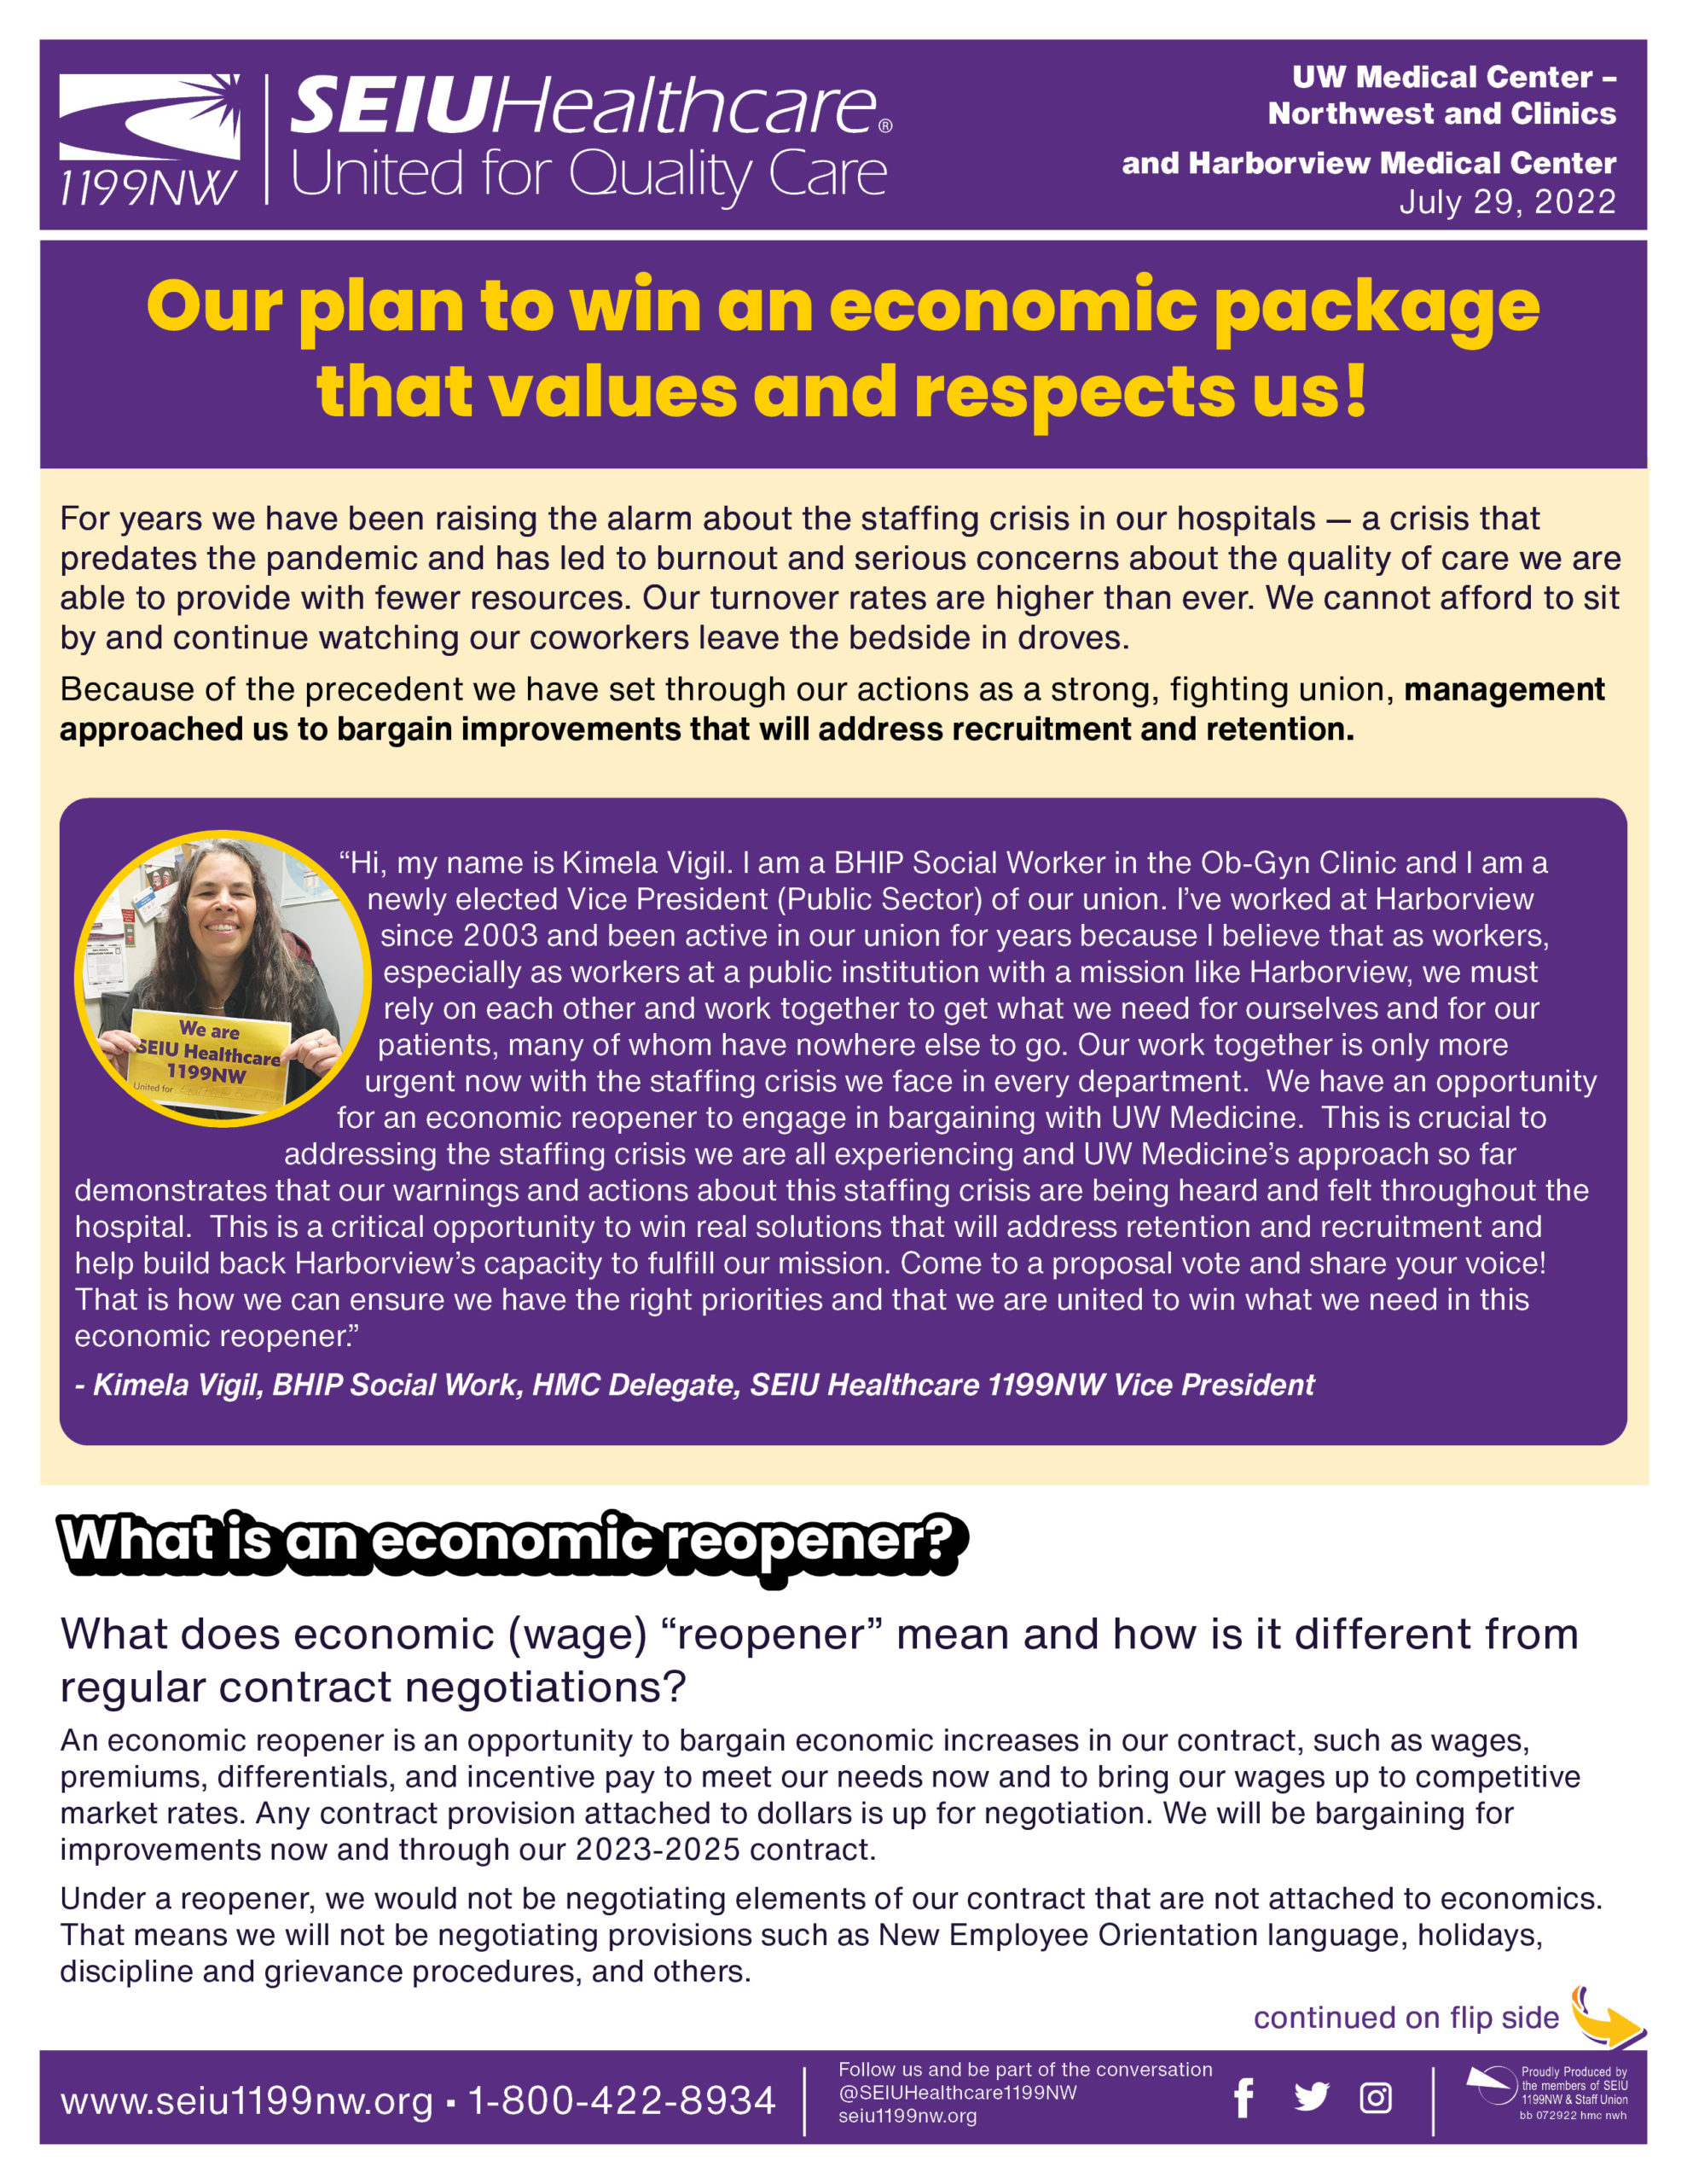 Our plan to win an economic package that values and respects us!